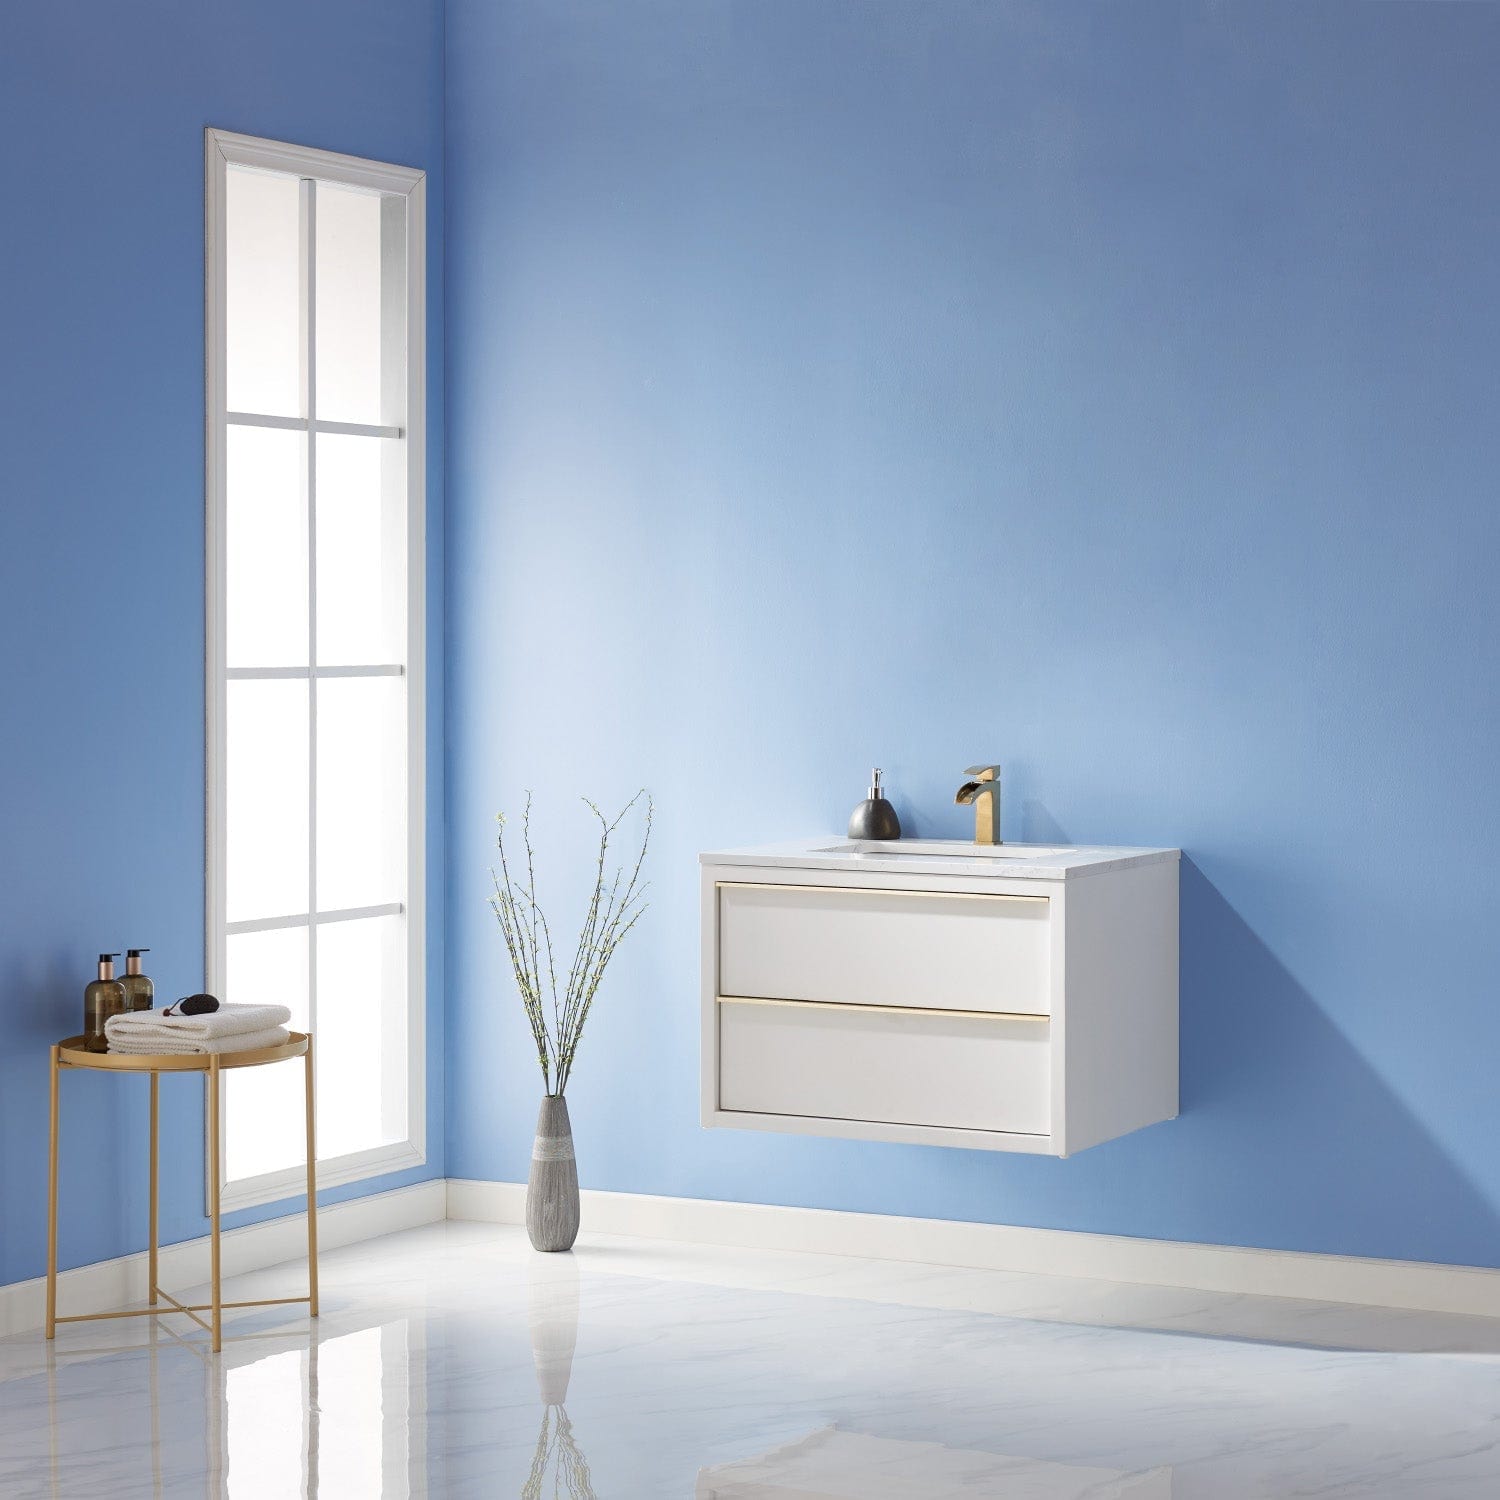 Altair Morgan 30" Single Bathroom Vanity Set in White and Composite Carrara White Stone Countertop without Mirror 534030-WH-AW-NM - Molaix631112971744Vanity534030-WH-AW-NM